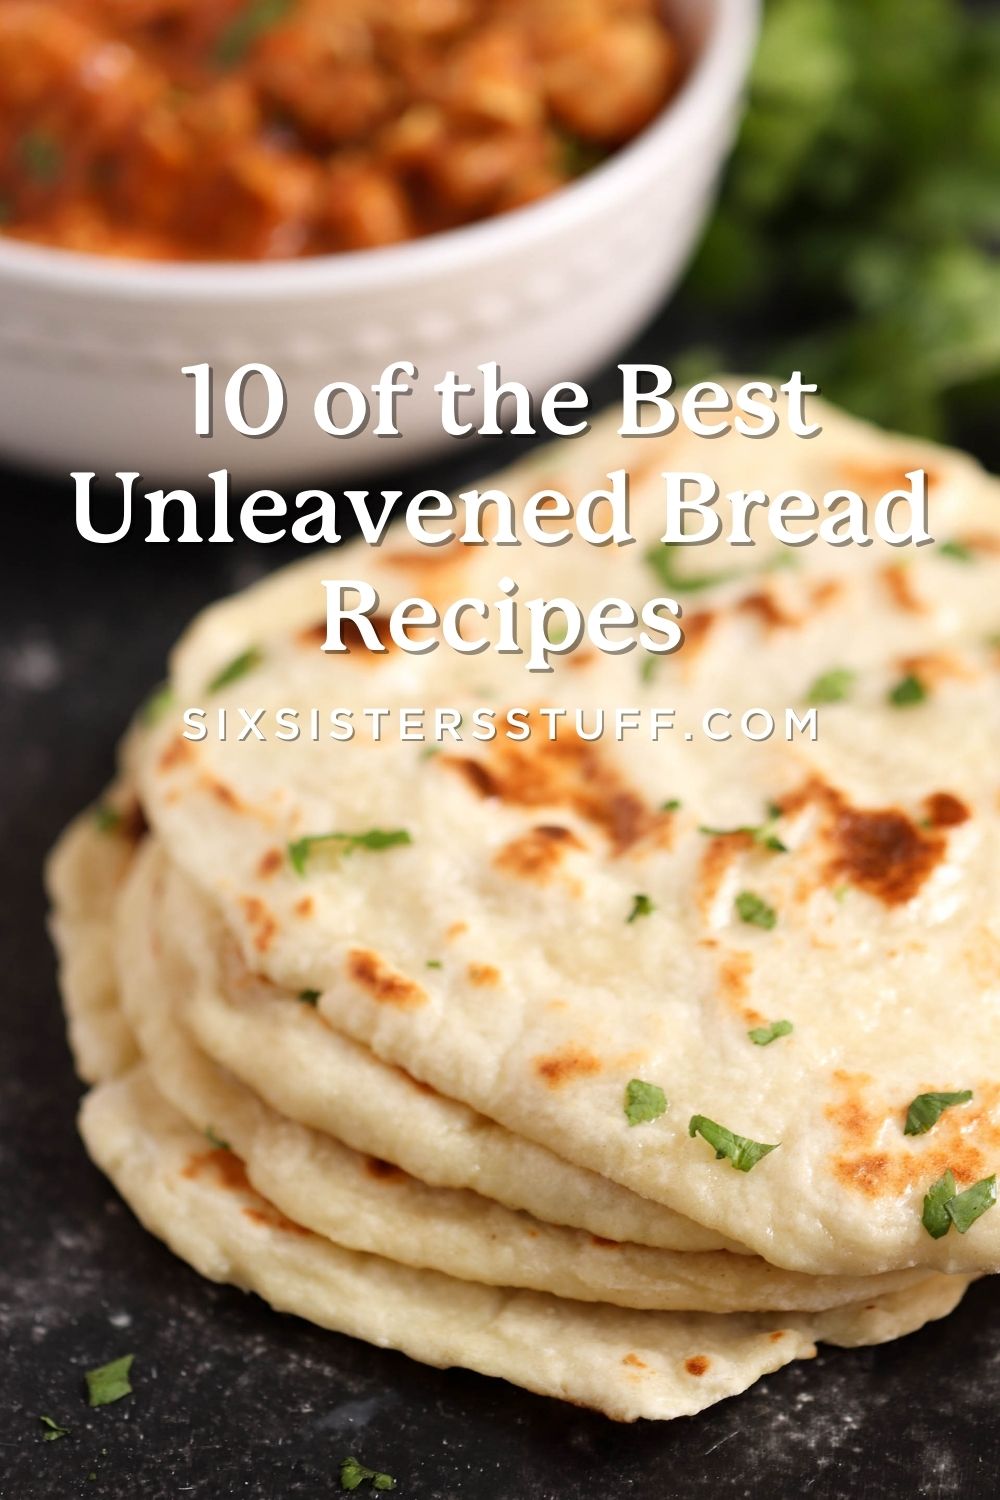 10 of the Best Unleavened Bread Recipes for Passover